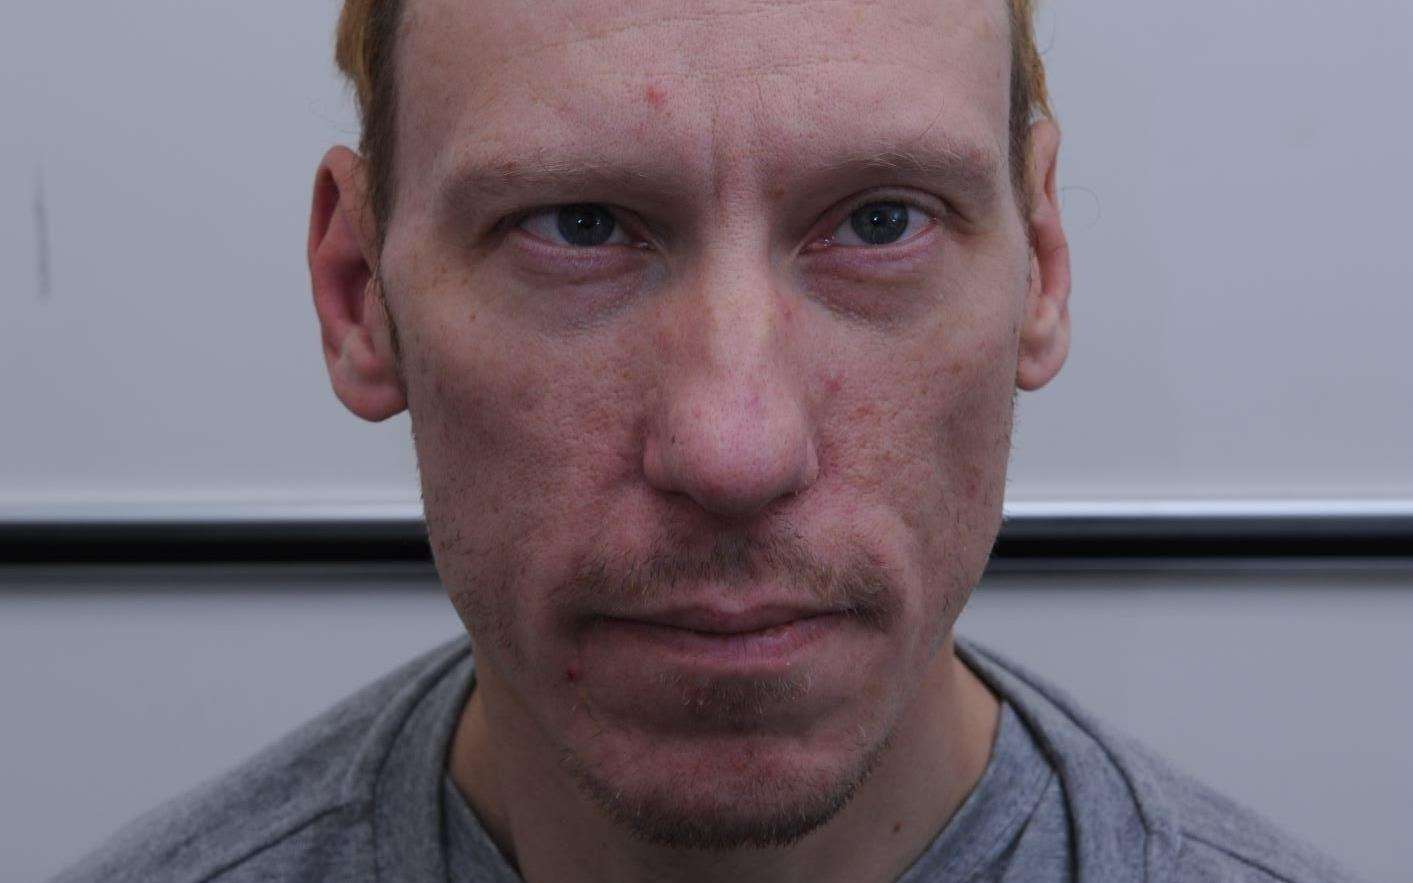 Stephen Port was jailed for life